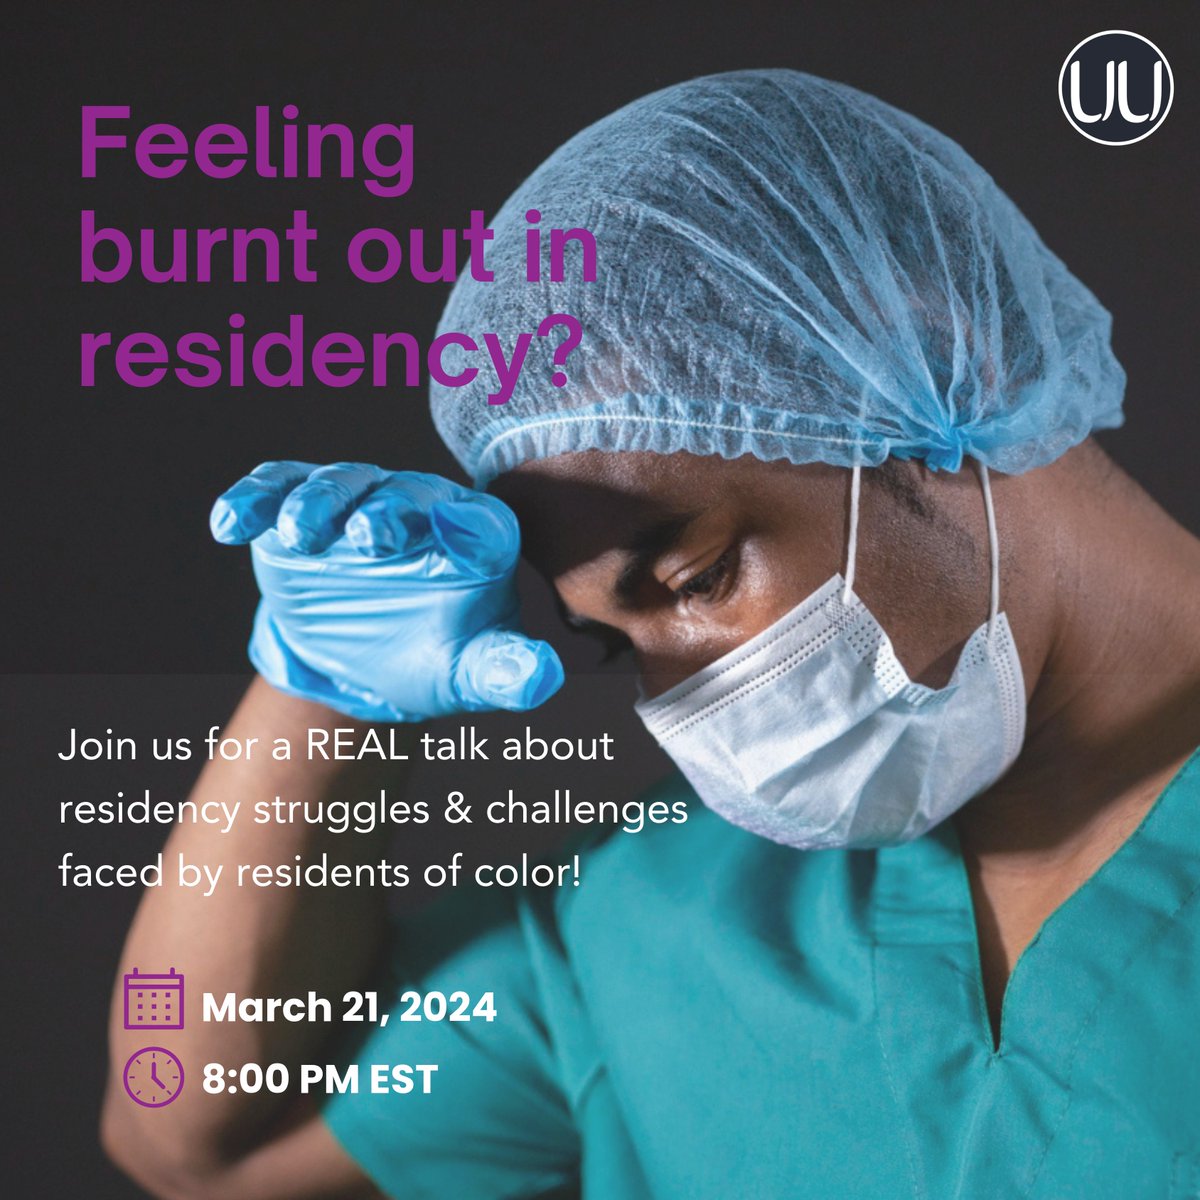 Feeling drained in residency? You're not alone, UU residents! Let's talk about challenges for residents of color. Join the conversation on March 21, 8 PM EST. Let's empower each other! Check your inbox for the meeting link. Not a member yet? Sign up at bit.ly/UU_SignUp.